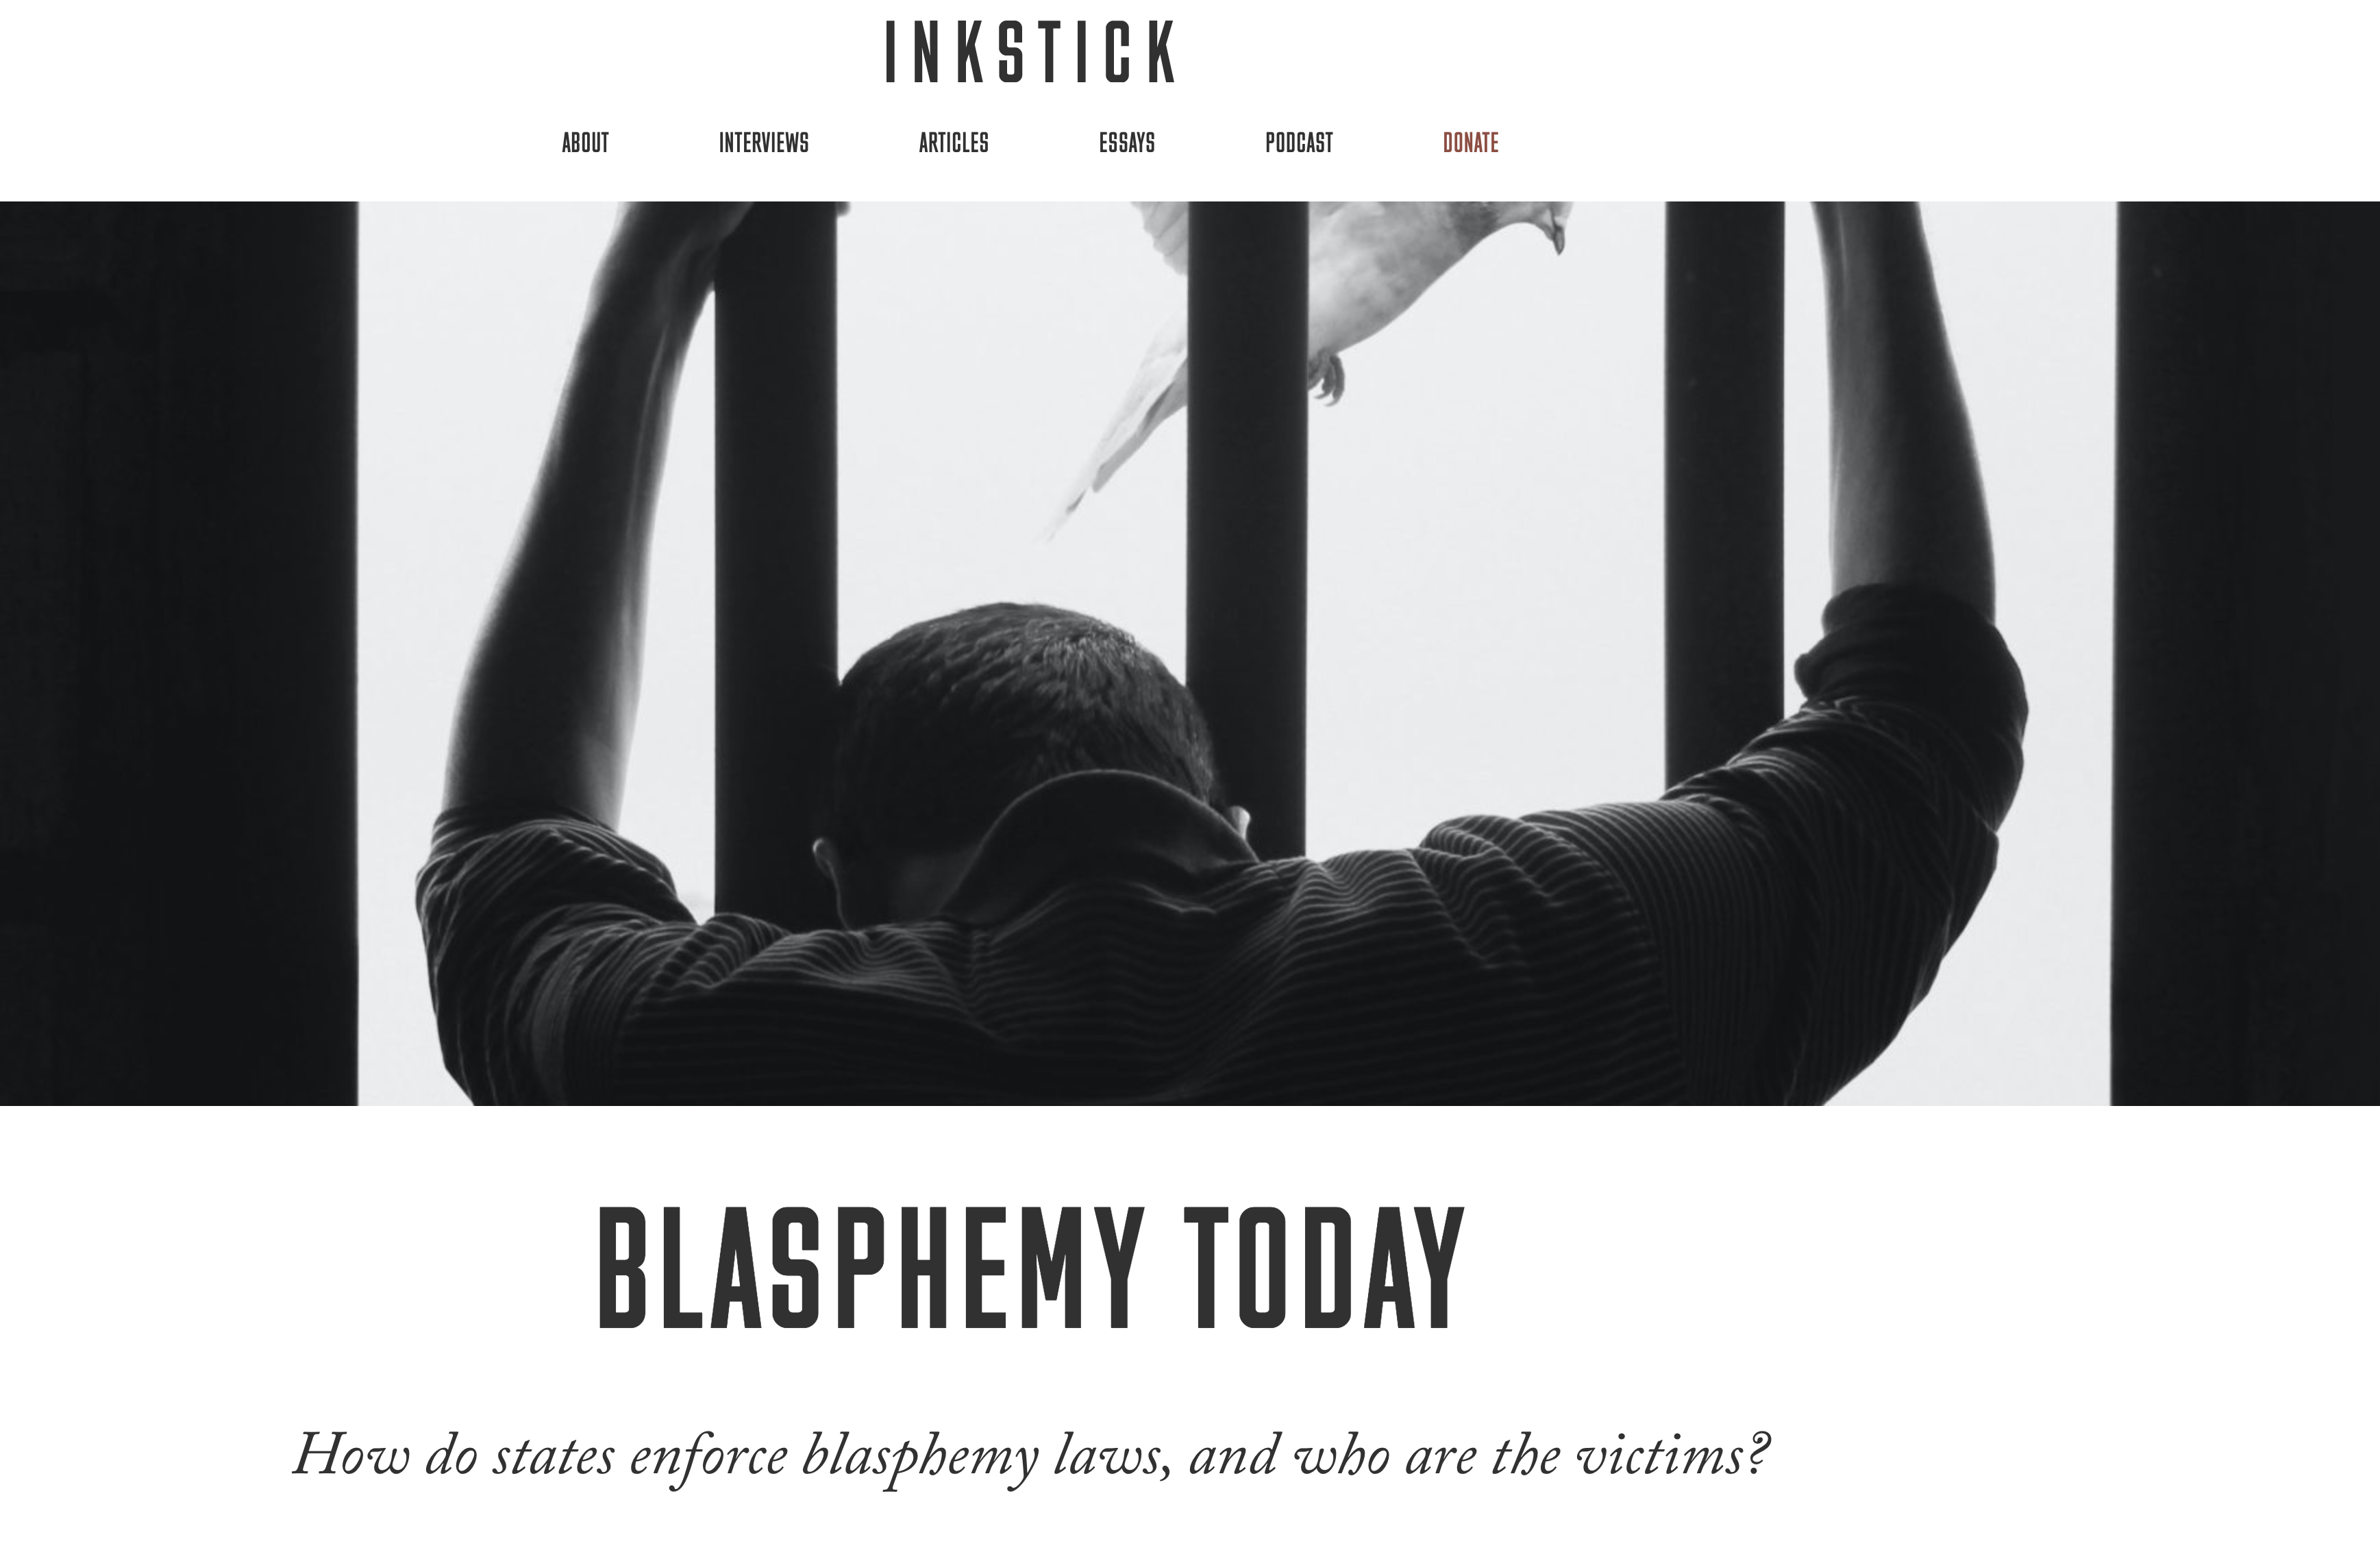 How do states enforce blasphemy laws, and who are the victims?